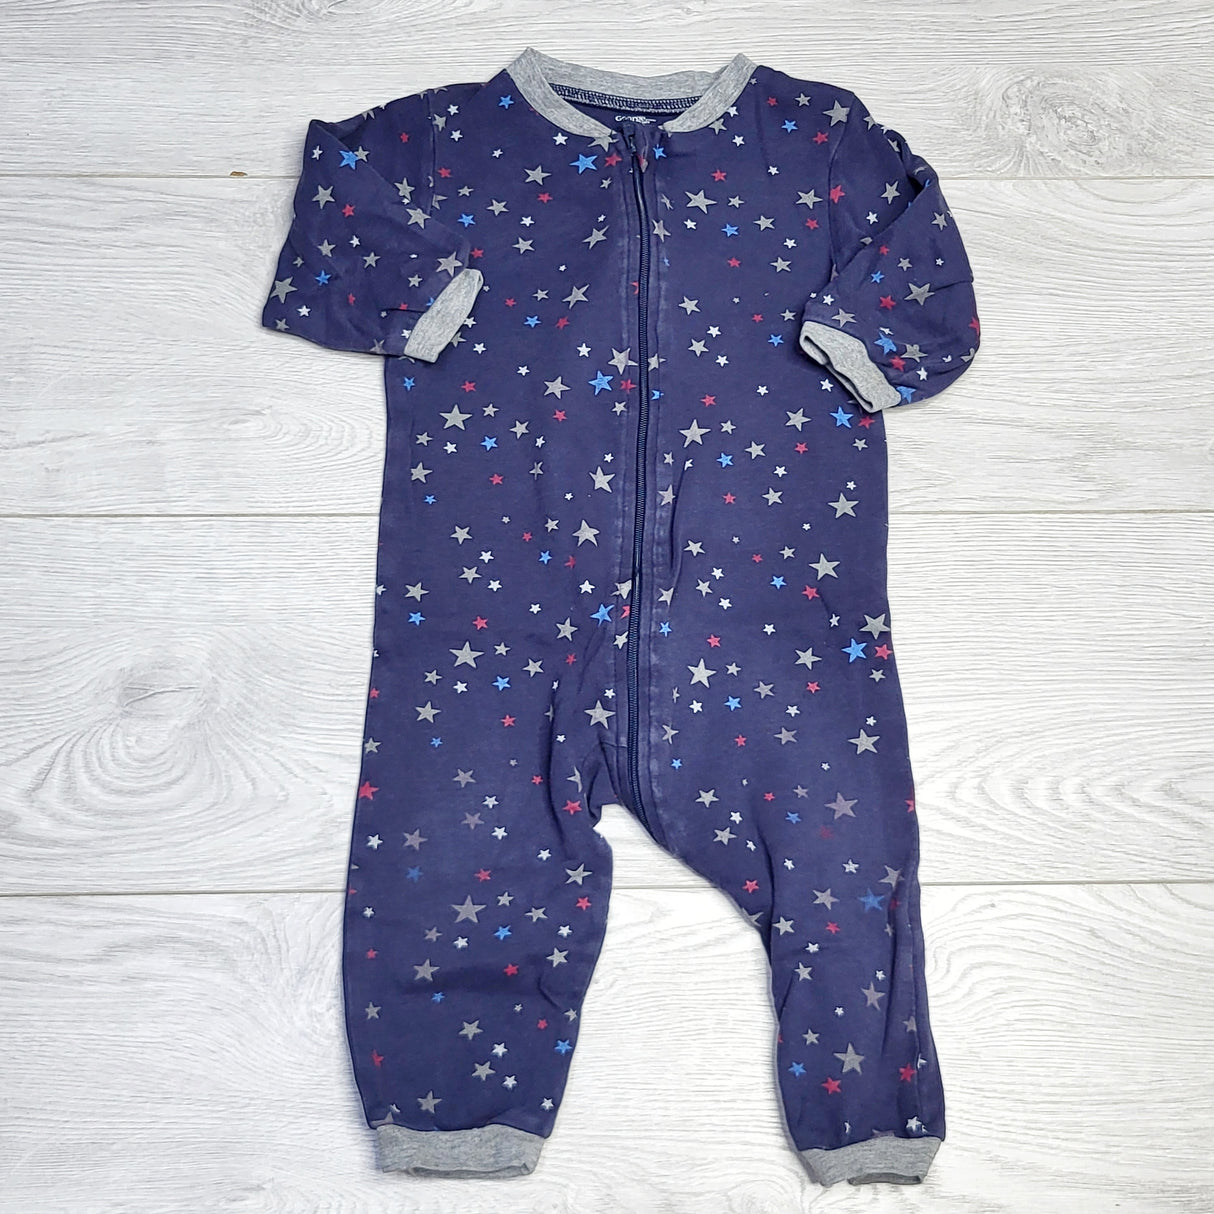 RZA2 - George zippered cotton sleeper with stars. Size 12-18 months